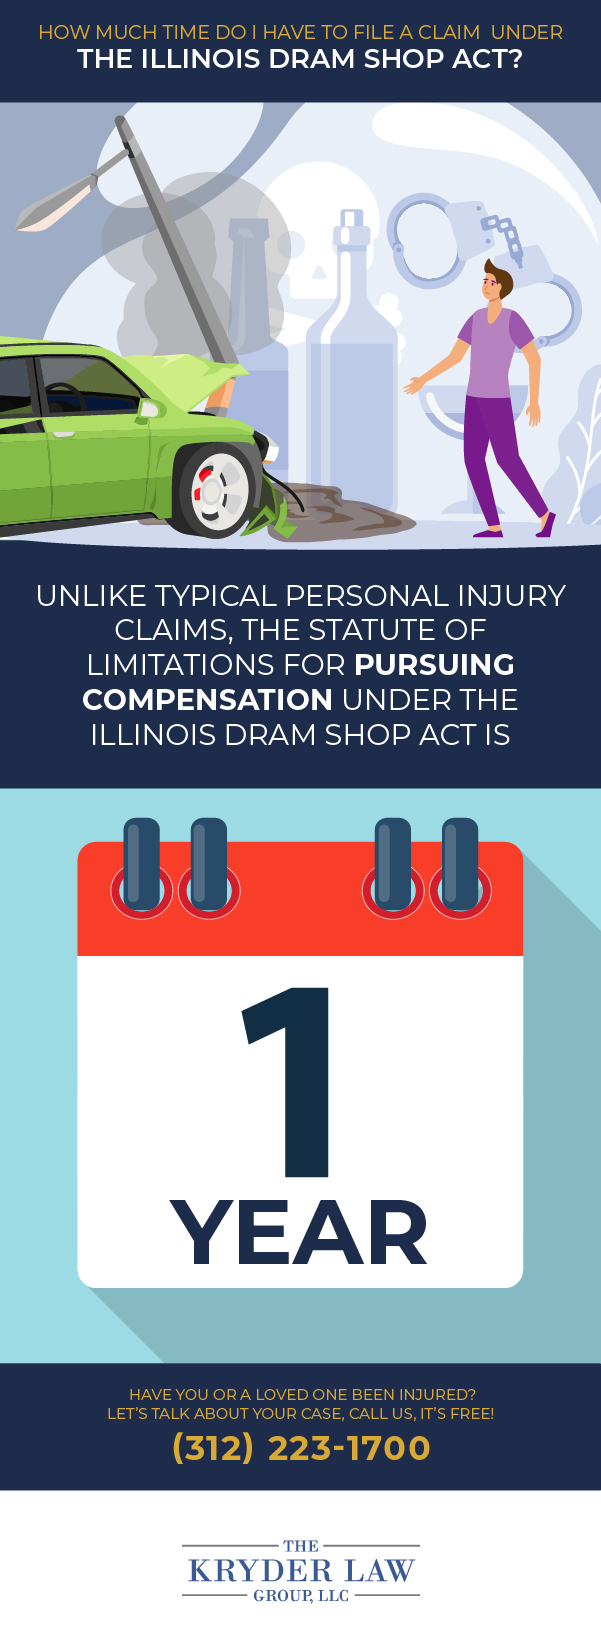 How Much Time Do I Have to File a Claim Under the Illinois Dram Shop Act Infographic